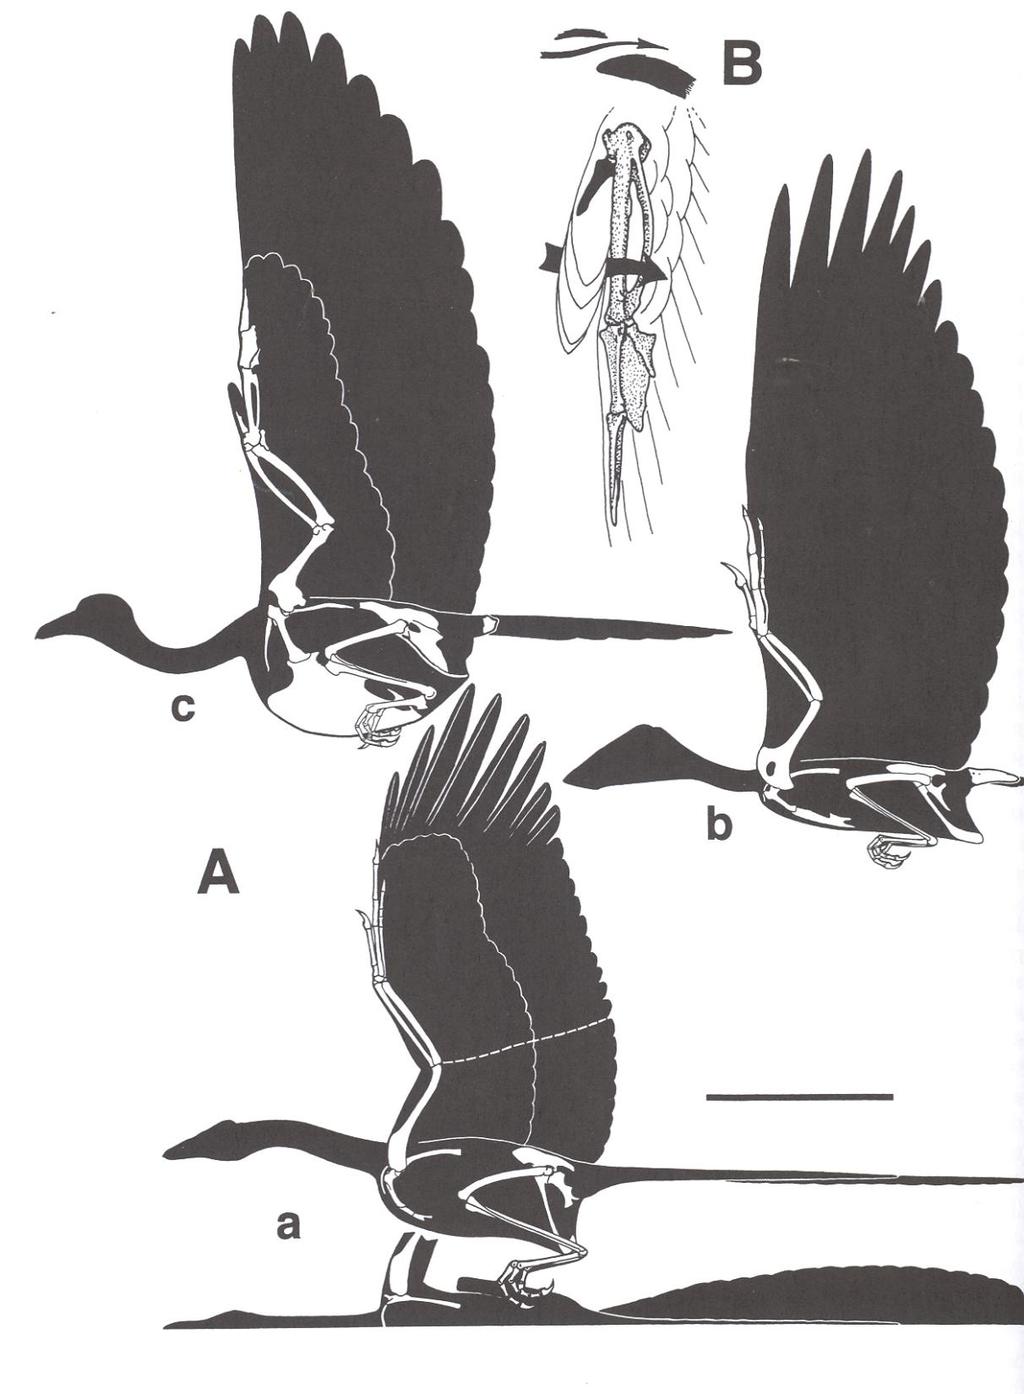 How about Archaeopteryx: Glider or flyer?